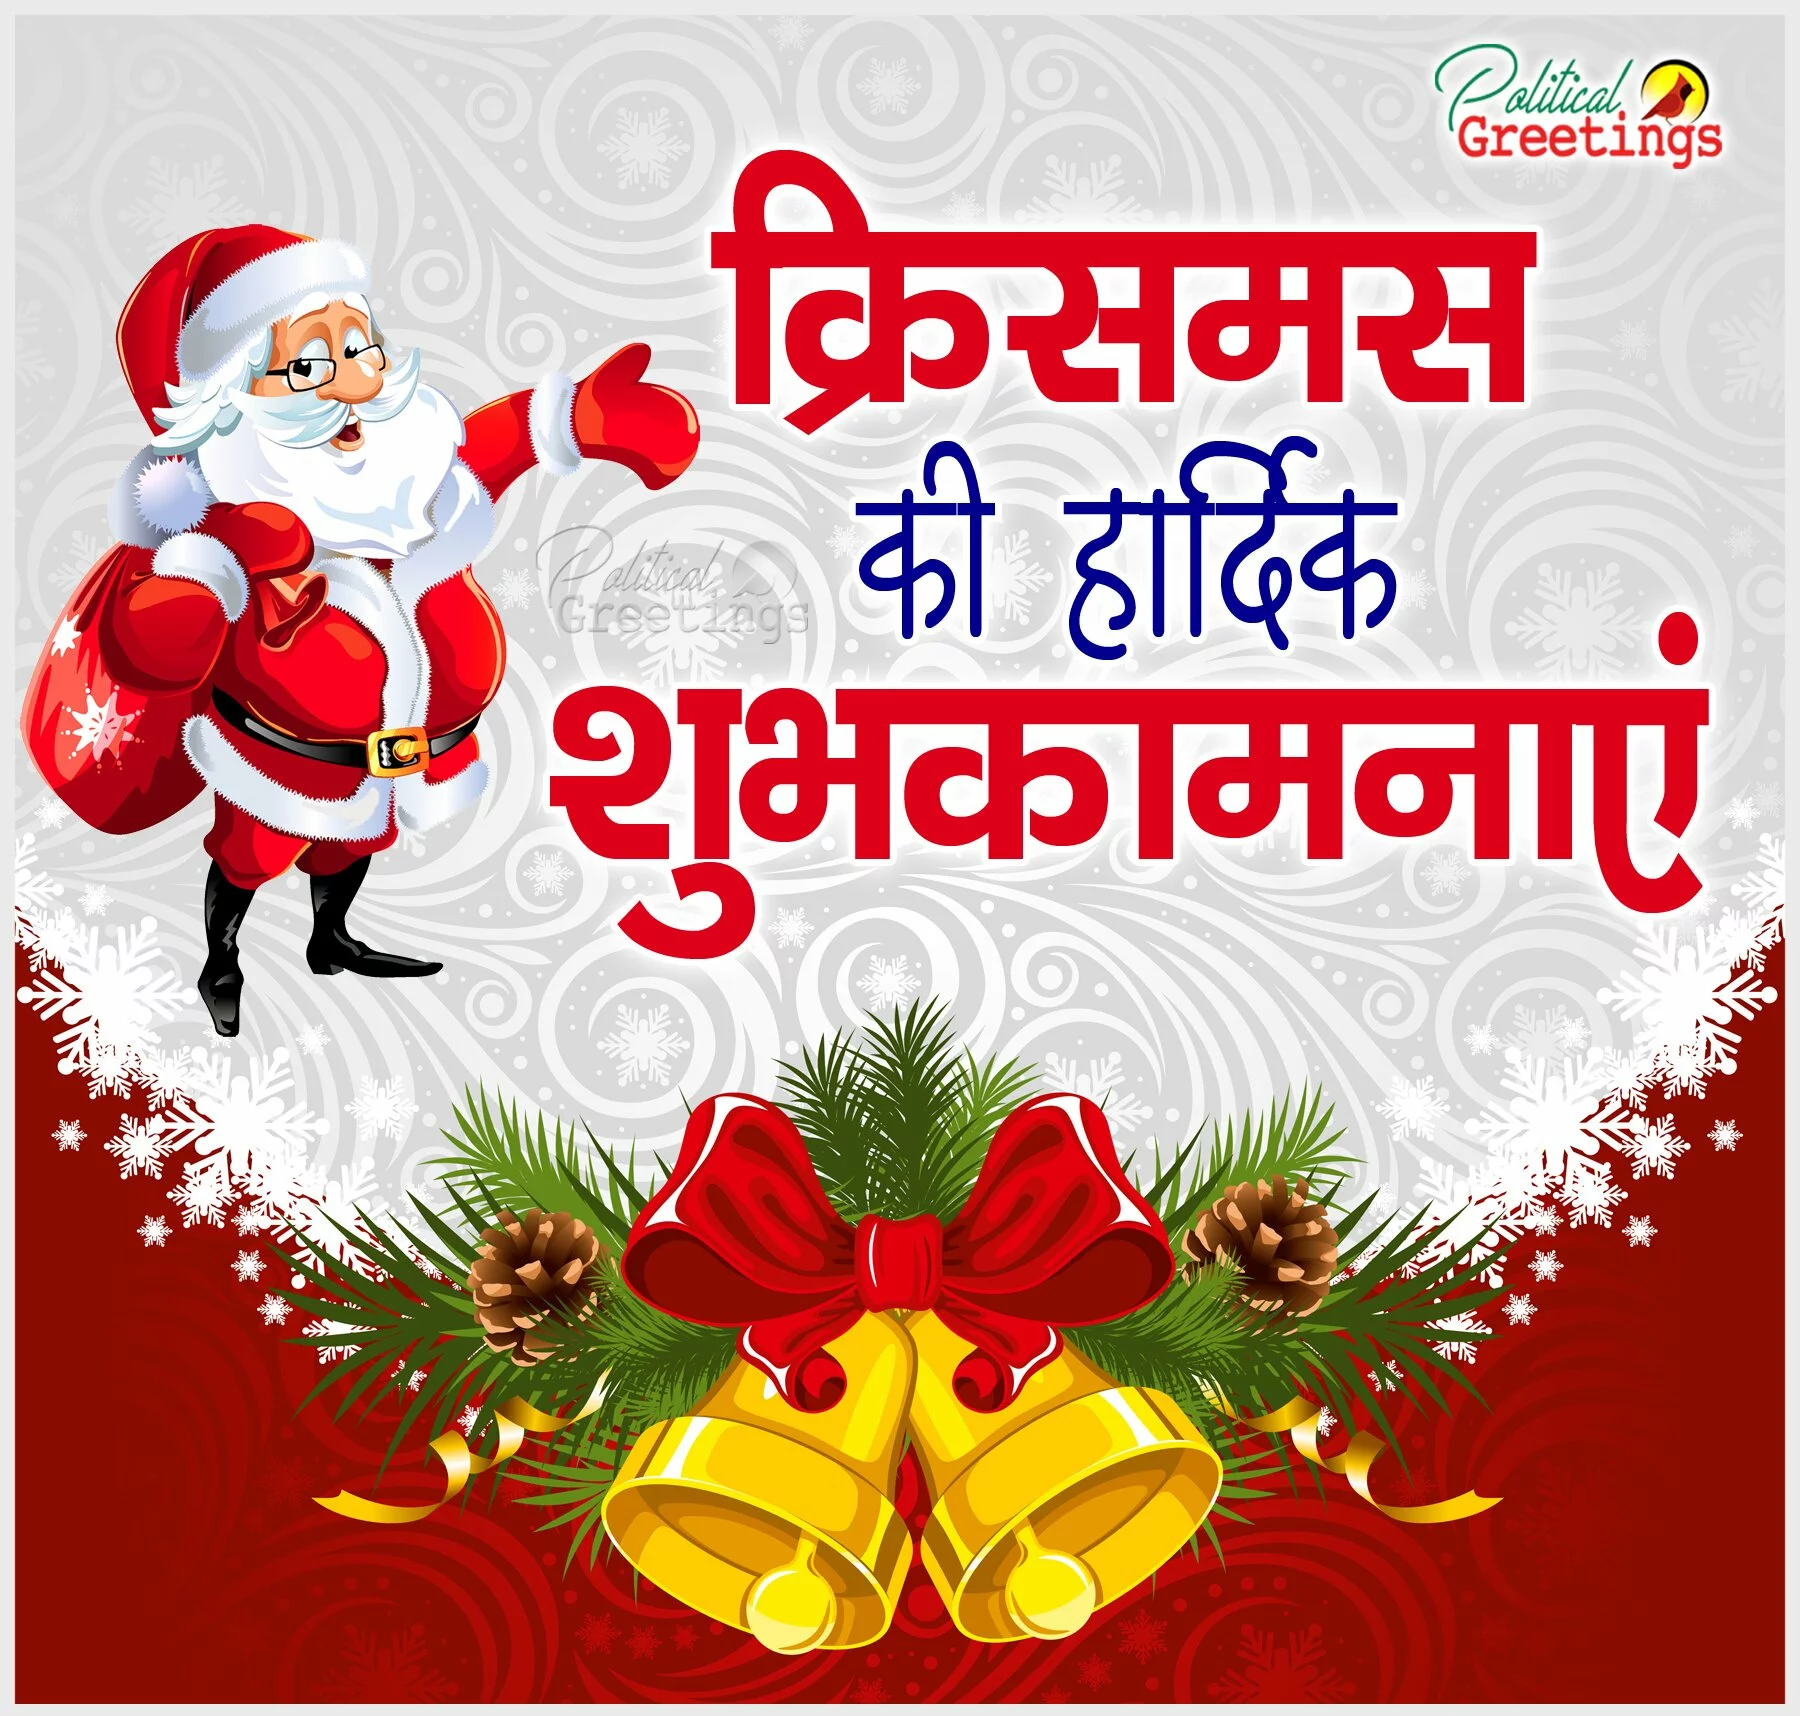 Happy Christmas 2017 Greetings images Best Wishes Merry Christmas Hindi Quotes Images